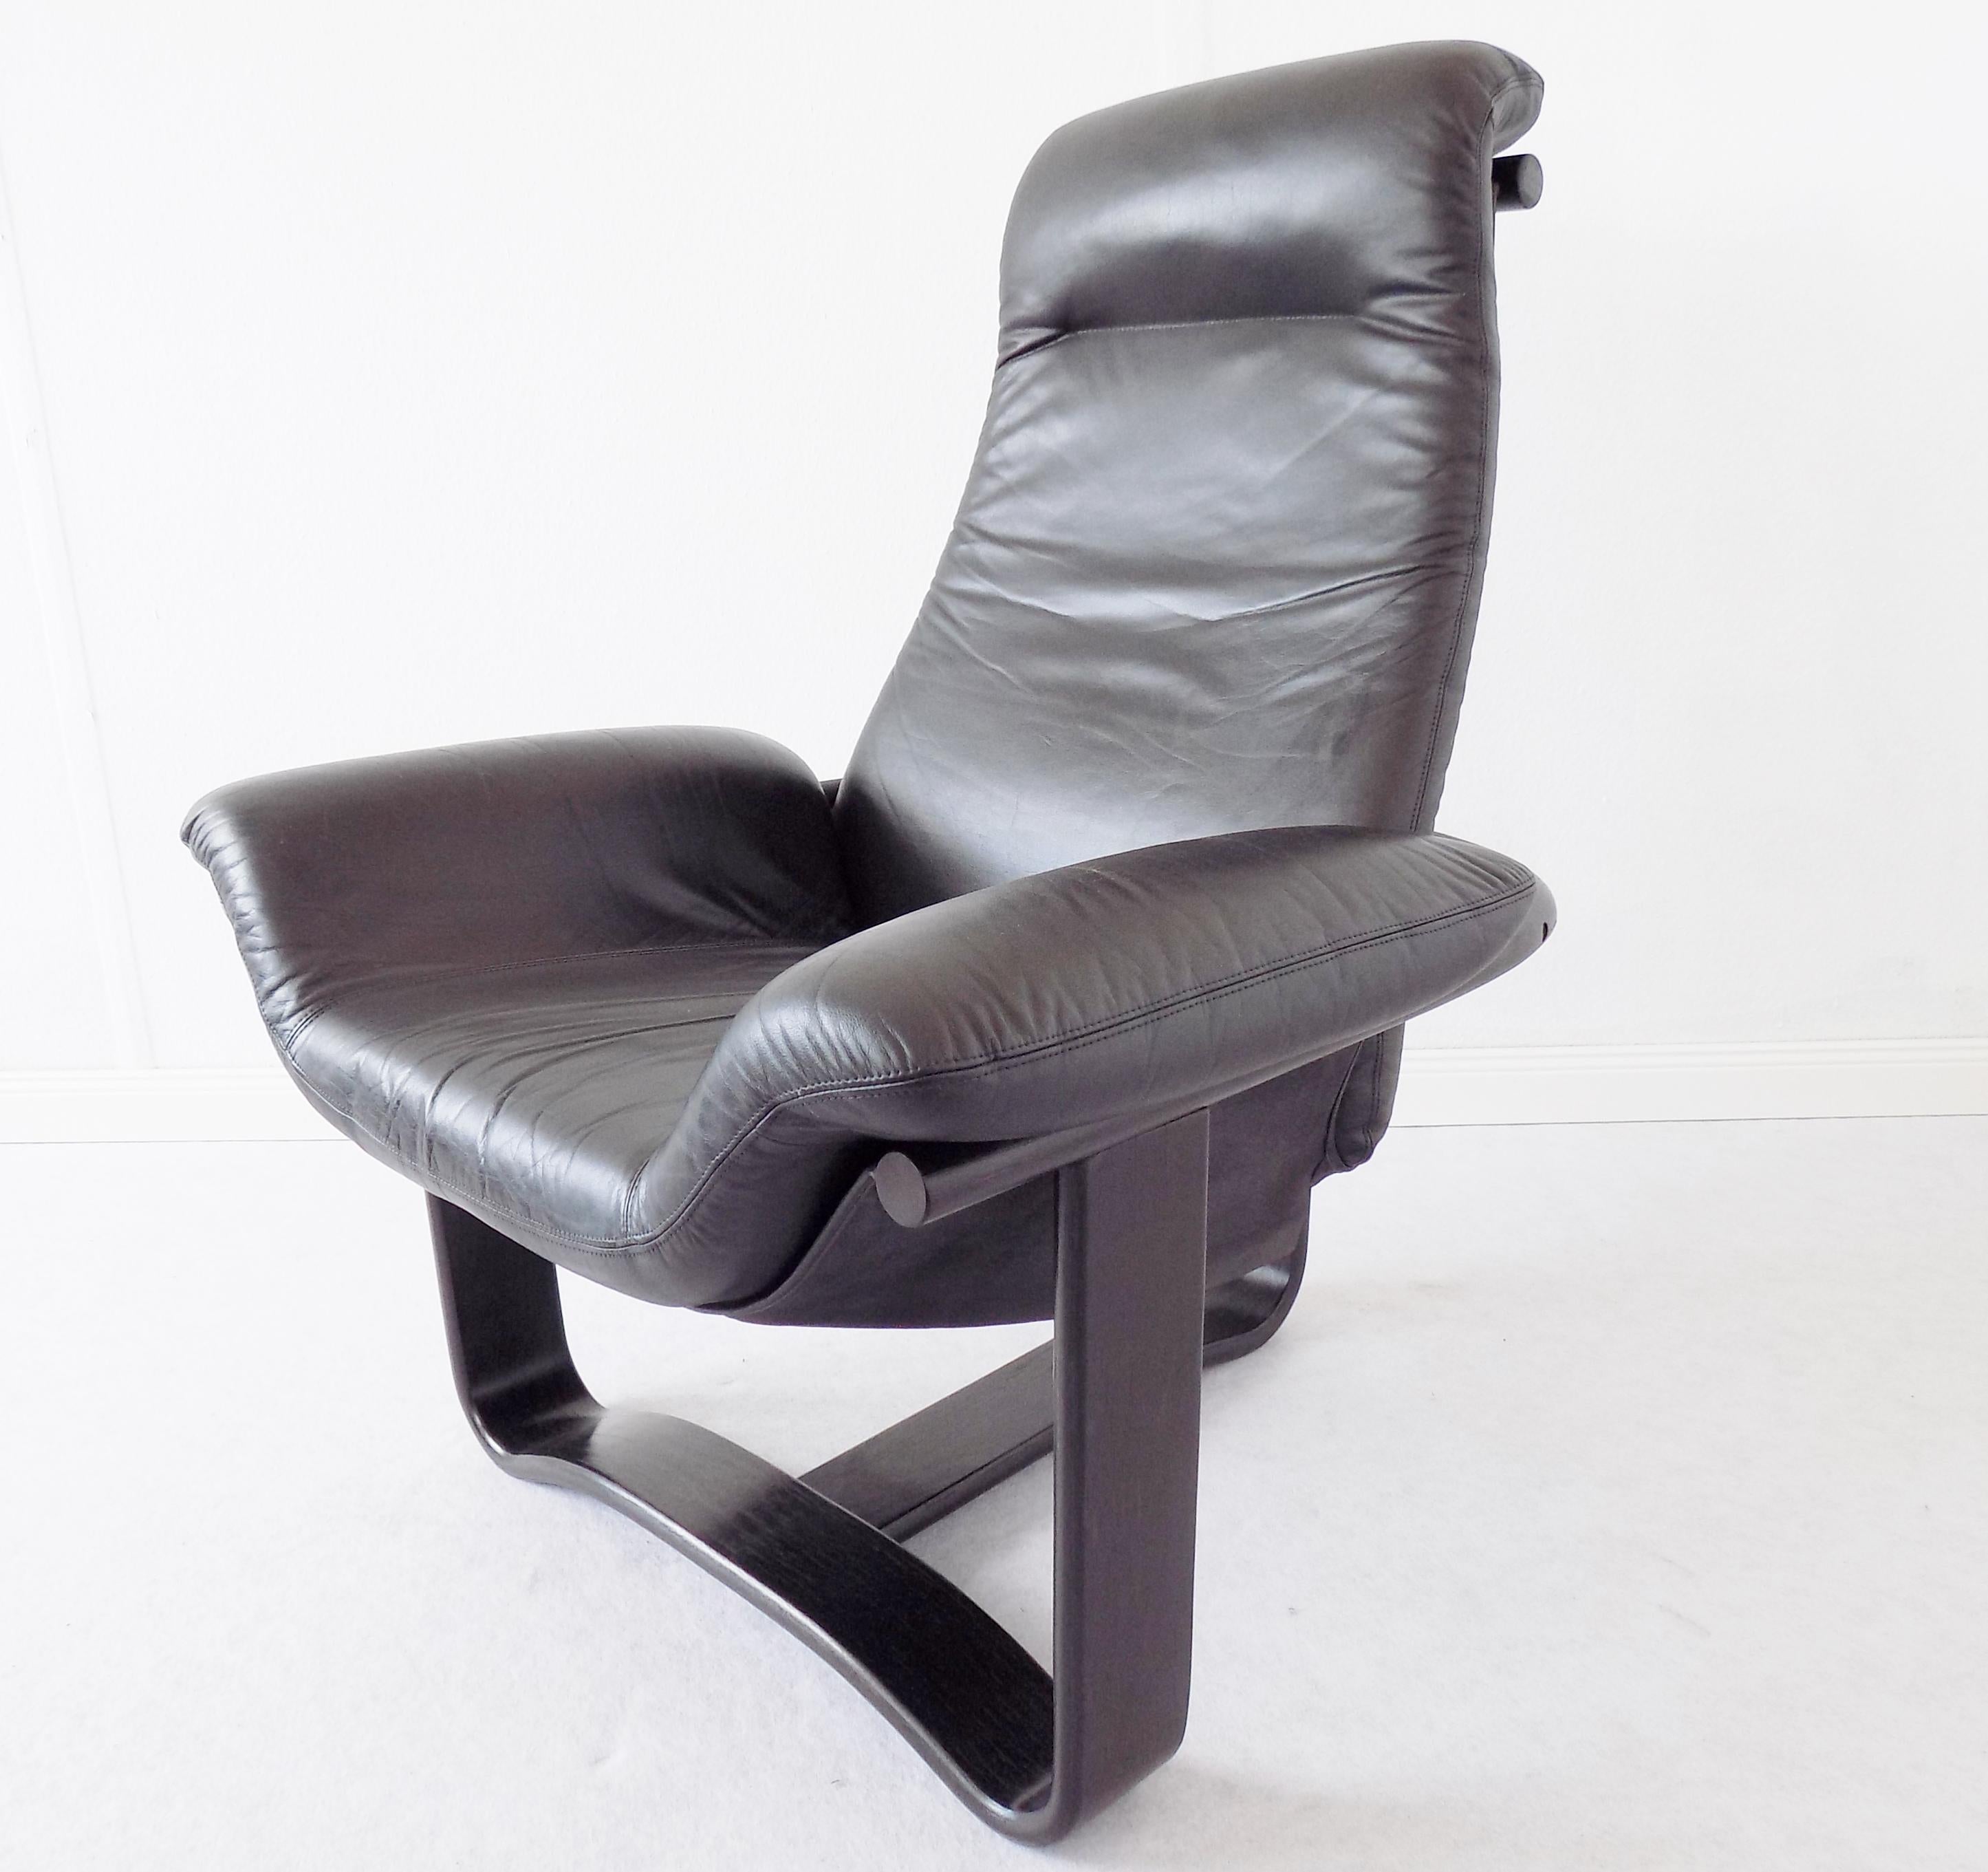 Manta Chair by Ingmar Relling for Westnofa, Black Leather, Scandinavian modern

The Manta armchair is one the most outstanding Designs of the Norwegian designer Ingmar Relling. This black Manta leather chair is in excellent condition. Leather and